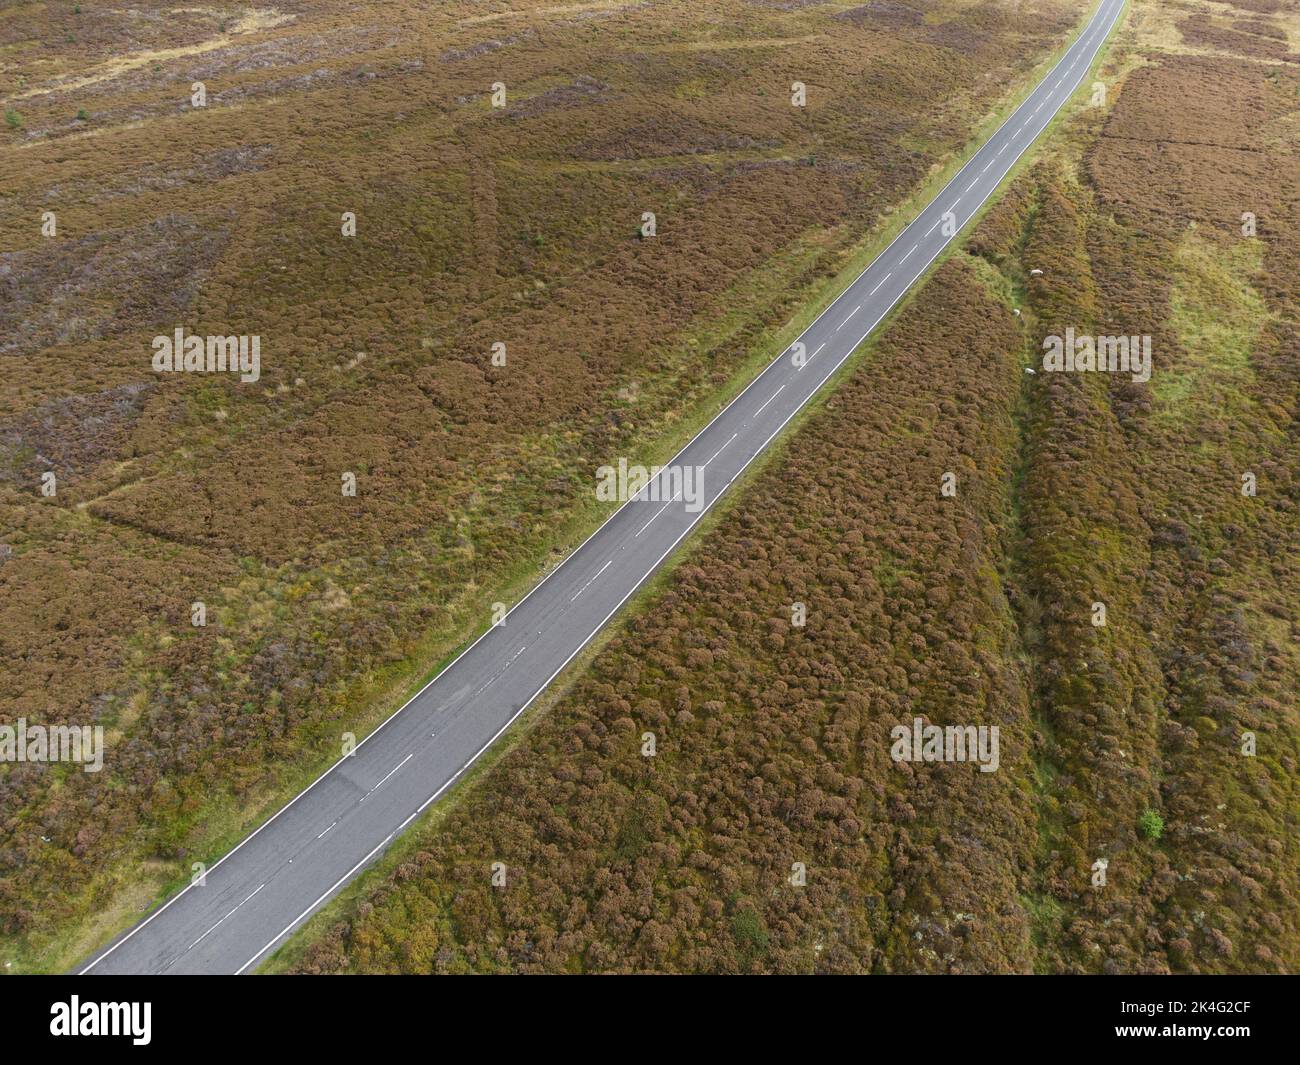 Remote moorland road in the UK Stock Photo